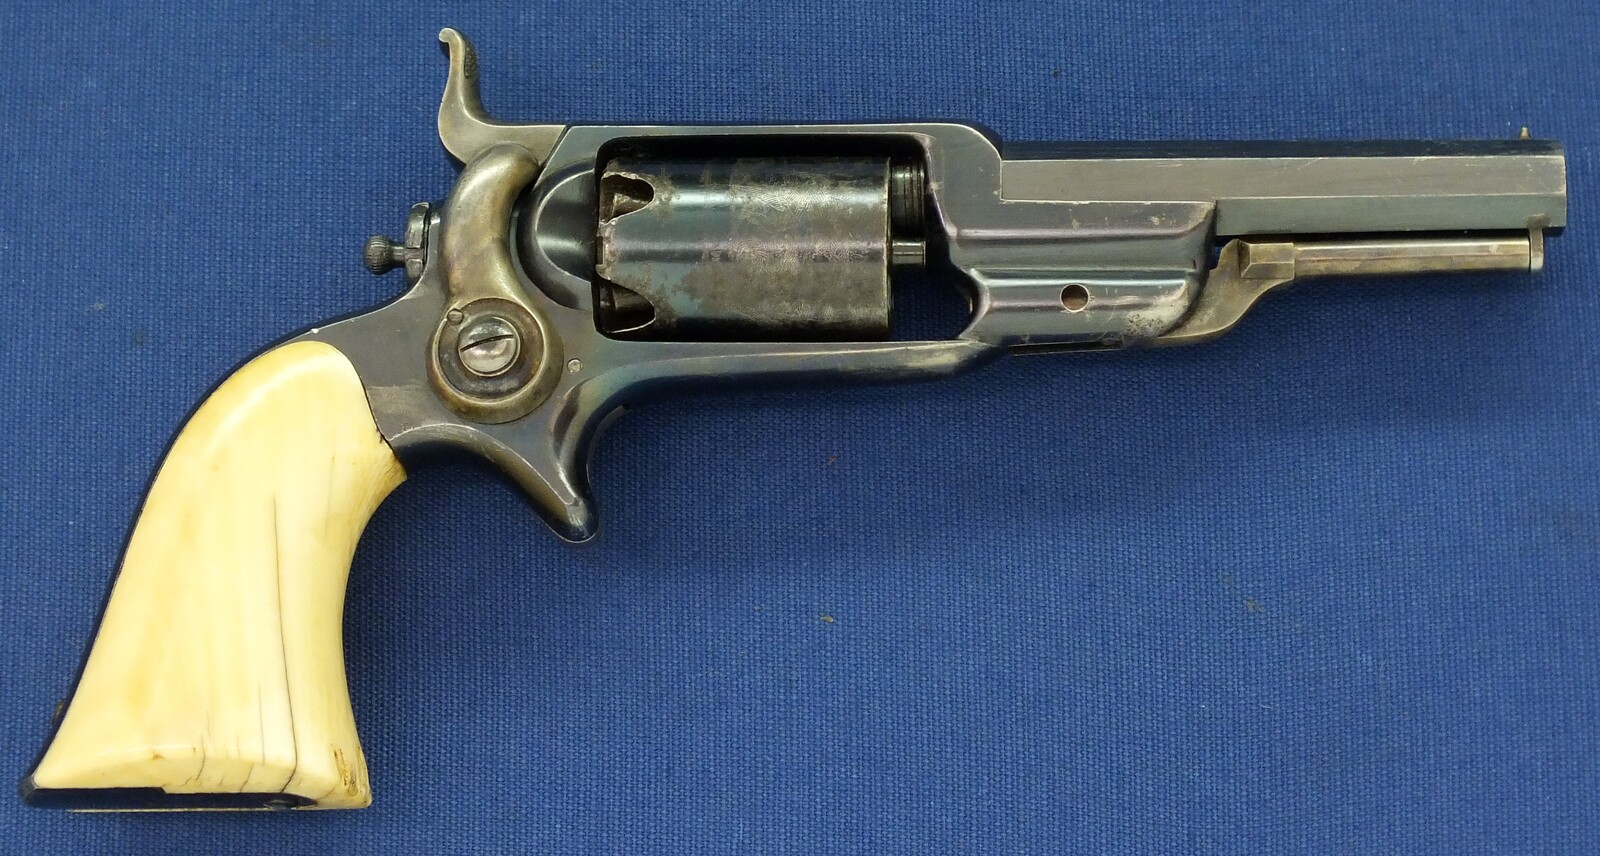 A fine antique American cased Colt Model 1855 Root model 2 Sidehammer percussion Pocket Revolver. 5 shot. 28 Caliber. 3,5 inch octagonal barrel with Hartford address. Dated Juli 22, 1860. In near mint condition. Price 5.250 euro.